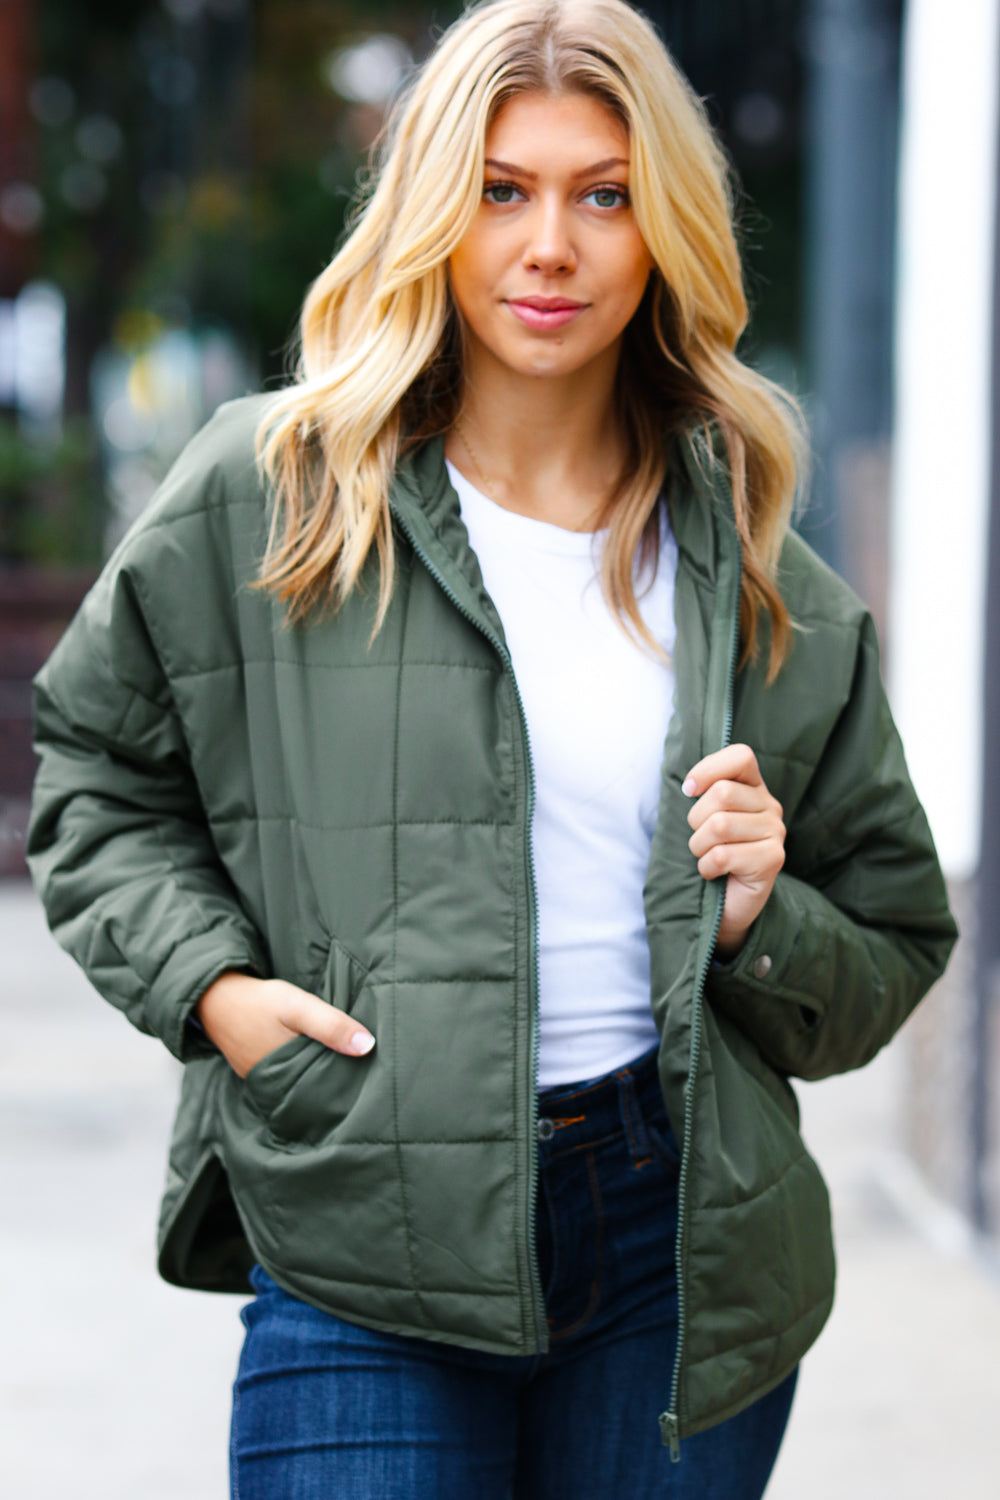 Olive Quilted Puffer Jacket